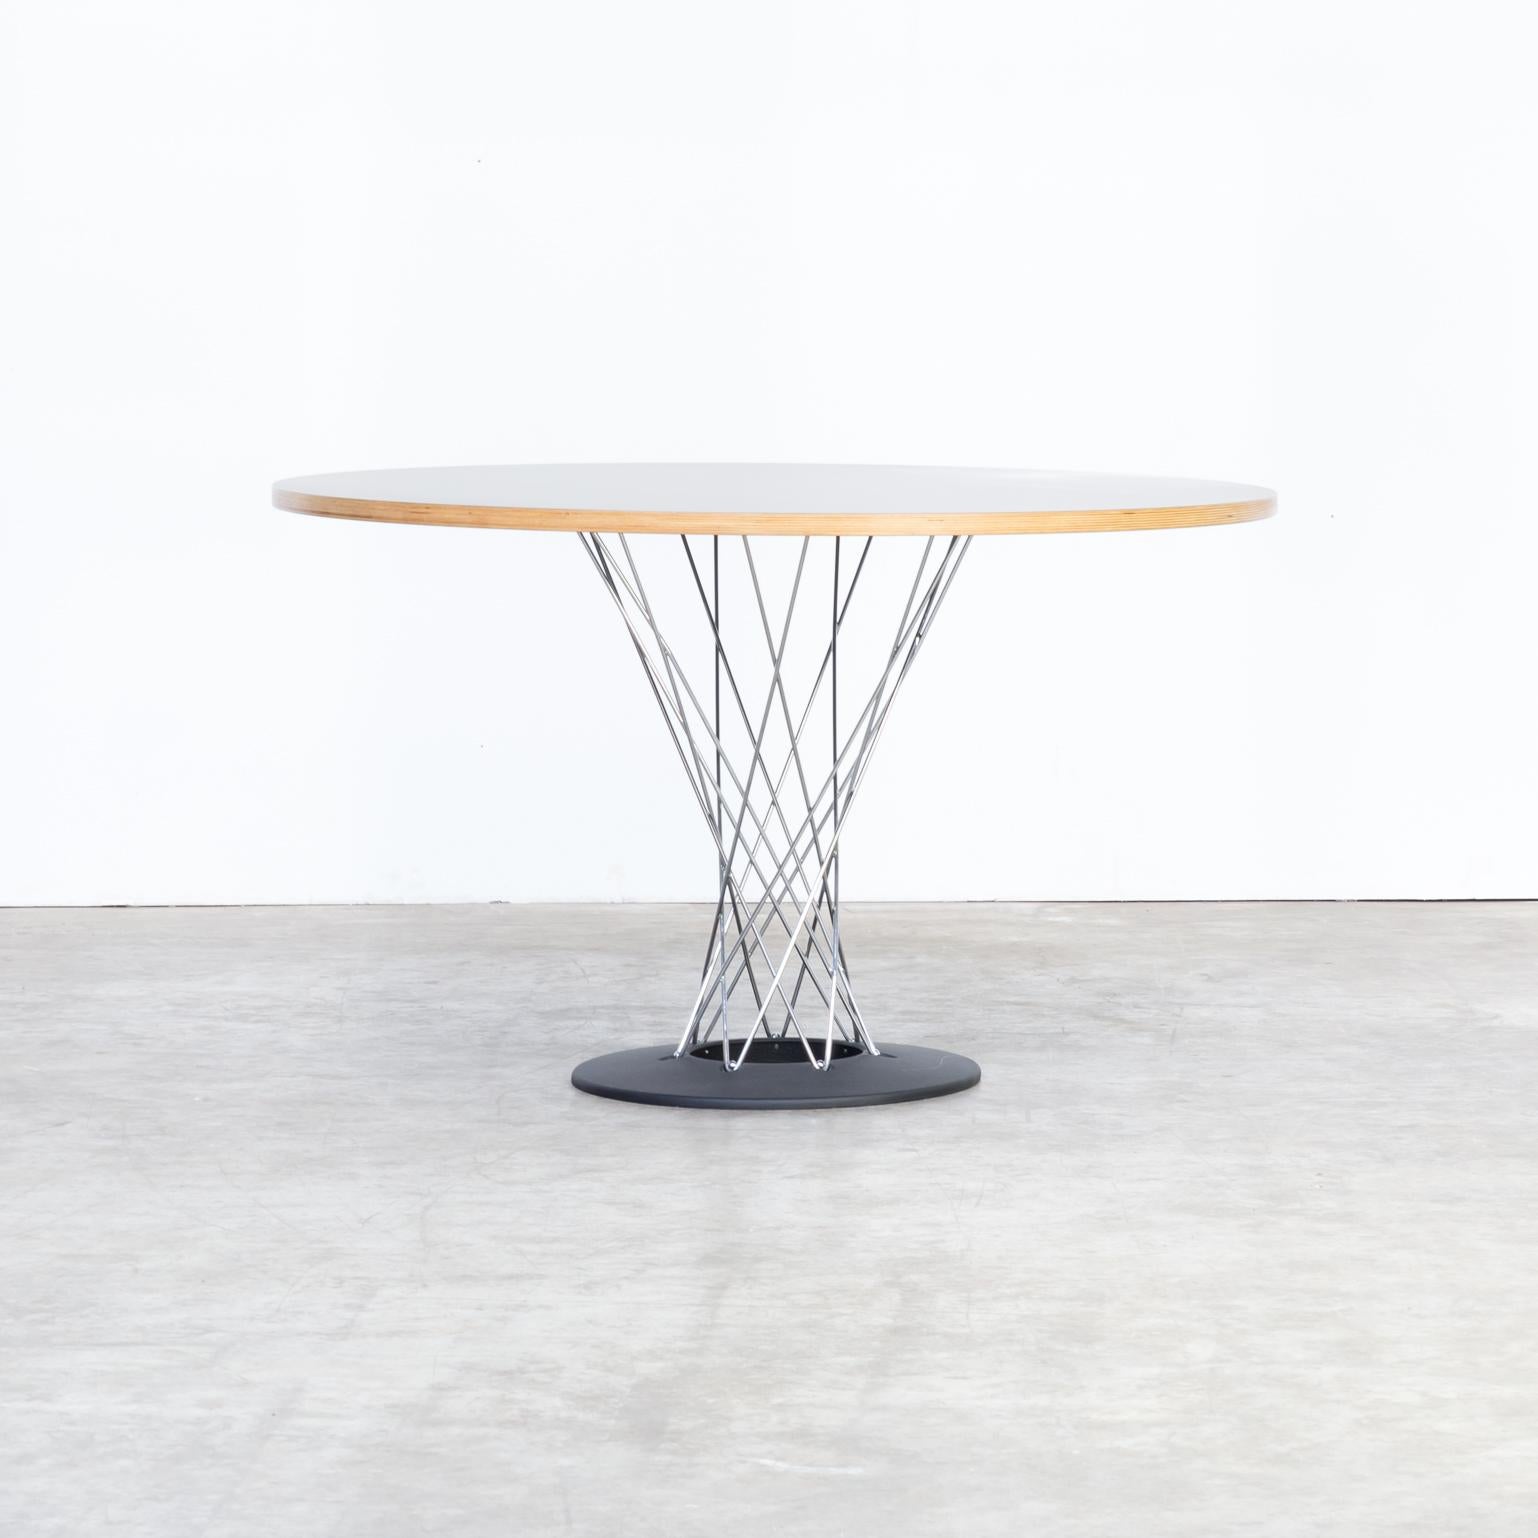 70s Isamu Noguchi Cyclone Table for Knoll. Good condition consistent with age and use.